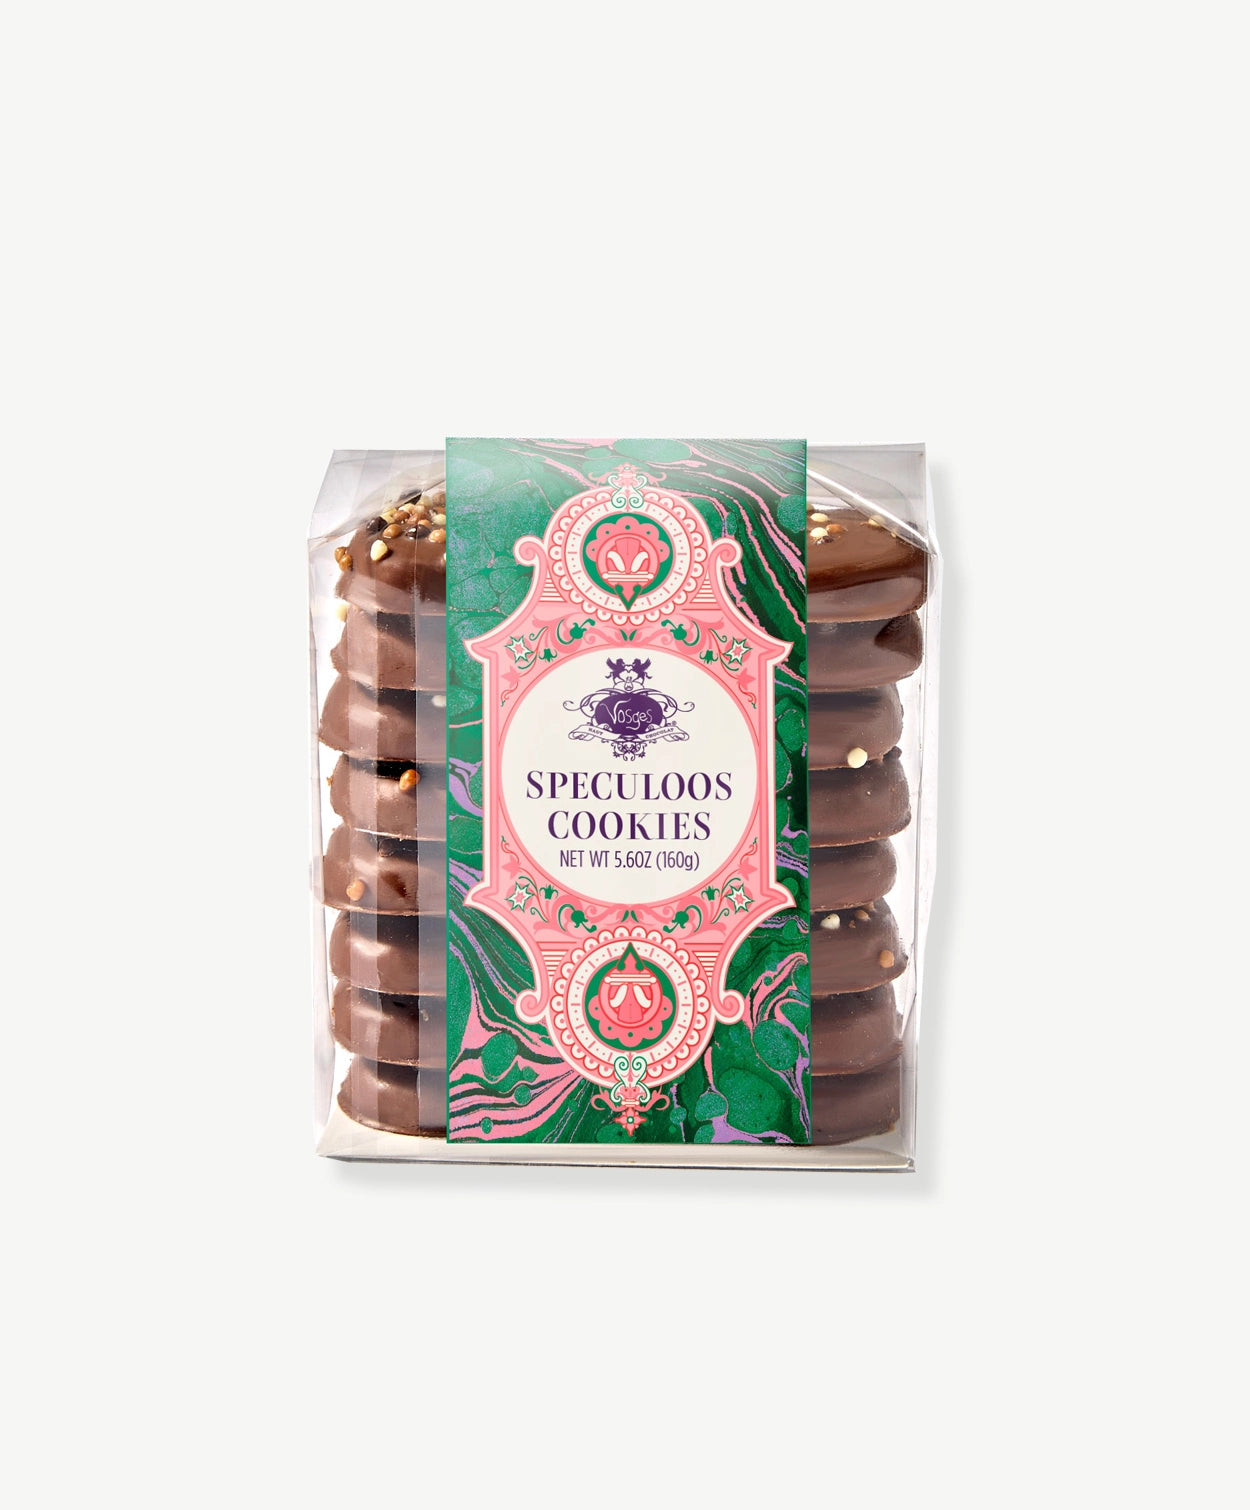 Vosges Chocolate Dipped Belgian Speculoos Cookies in a clear plastic wrapper bearing a green and pink label, on a grey background.